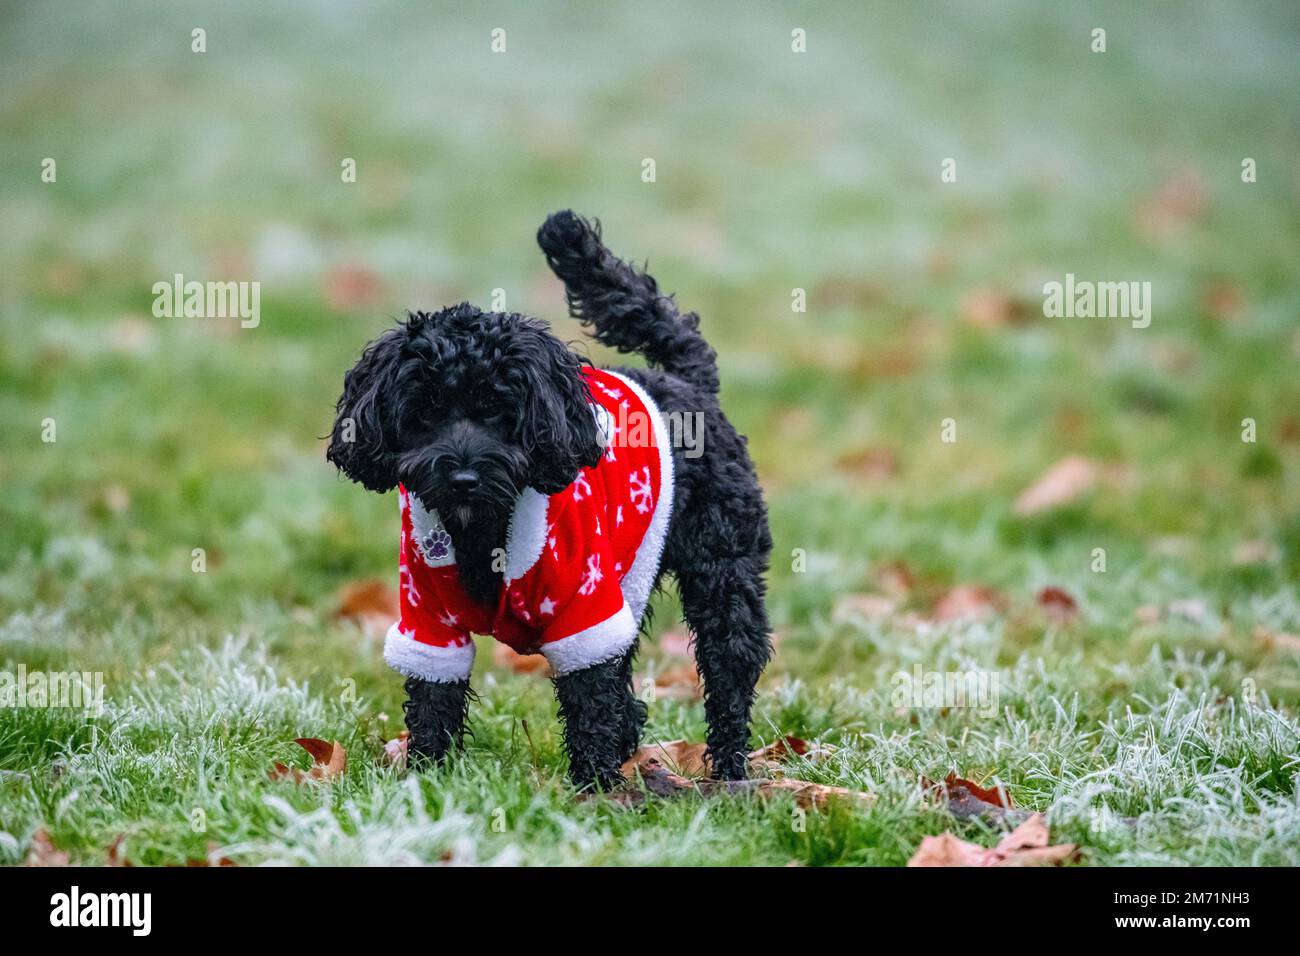 A small dog wears a Christmas suit on a frosty day Stock Photo